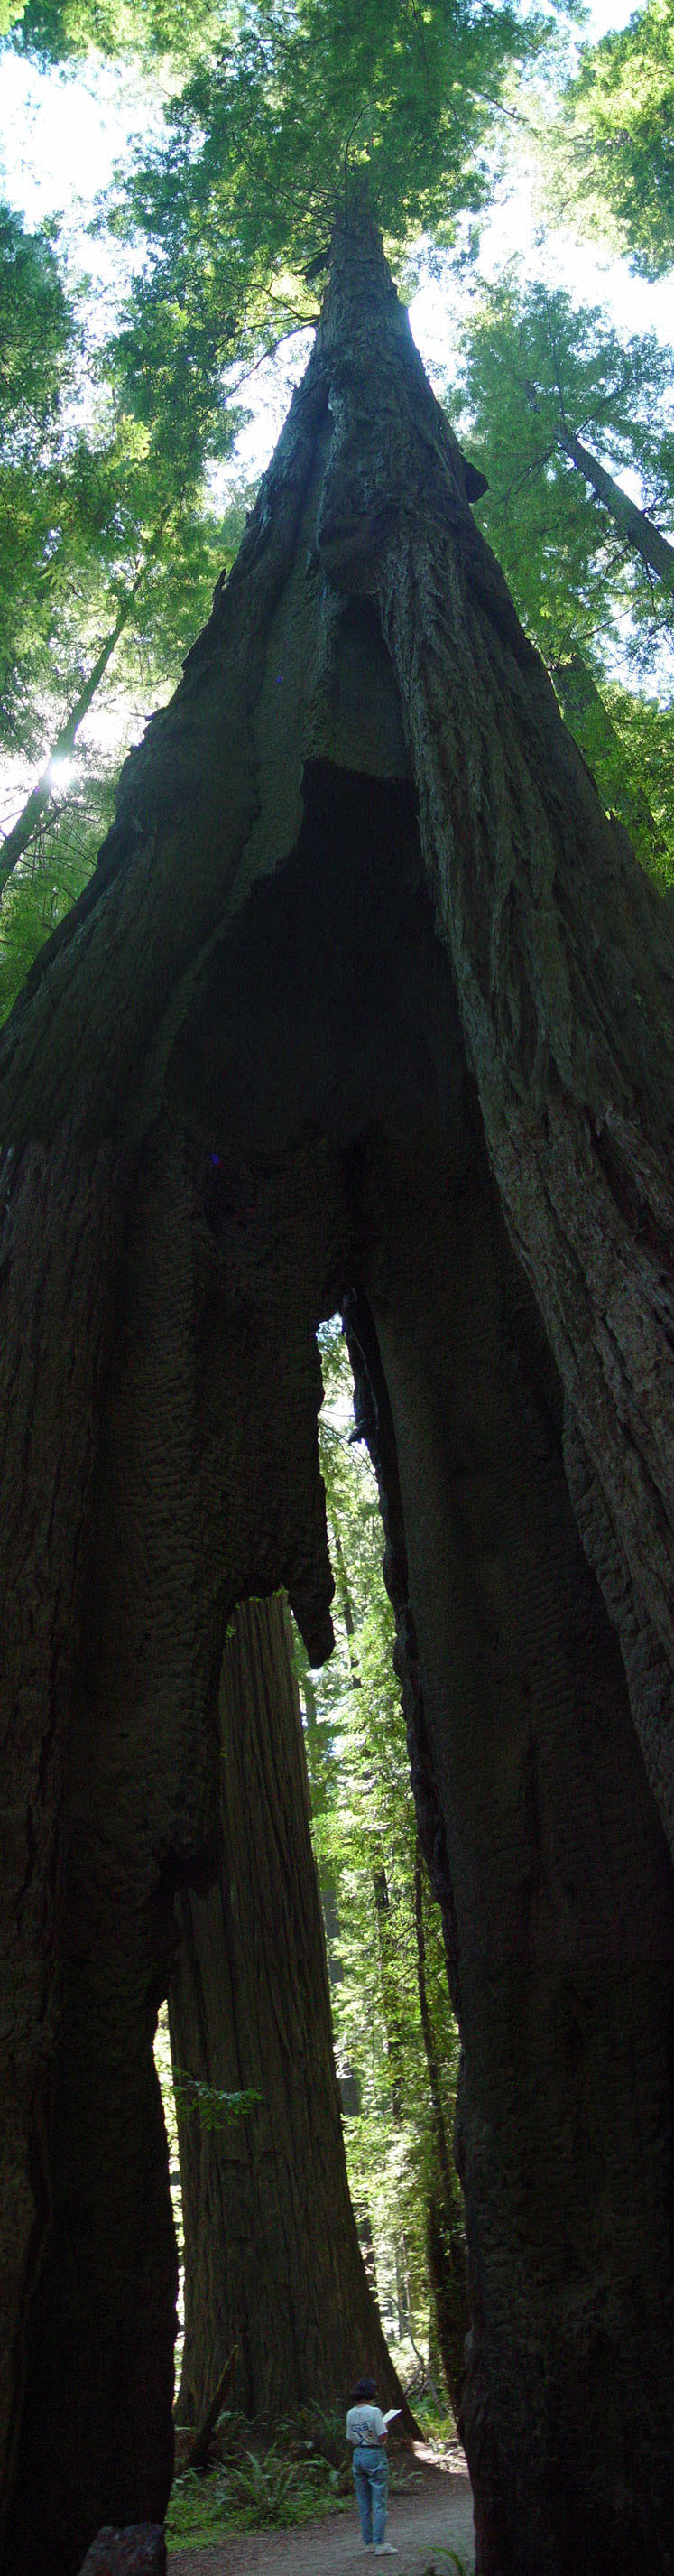 Redwood tree straddles the trail